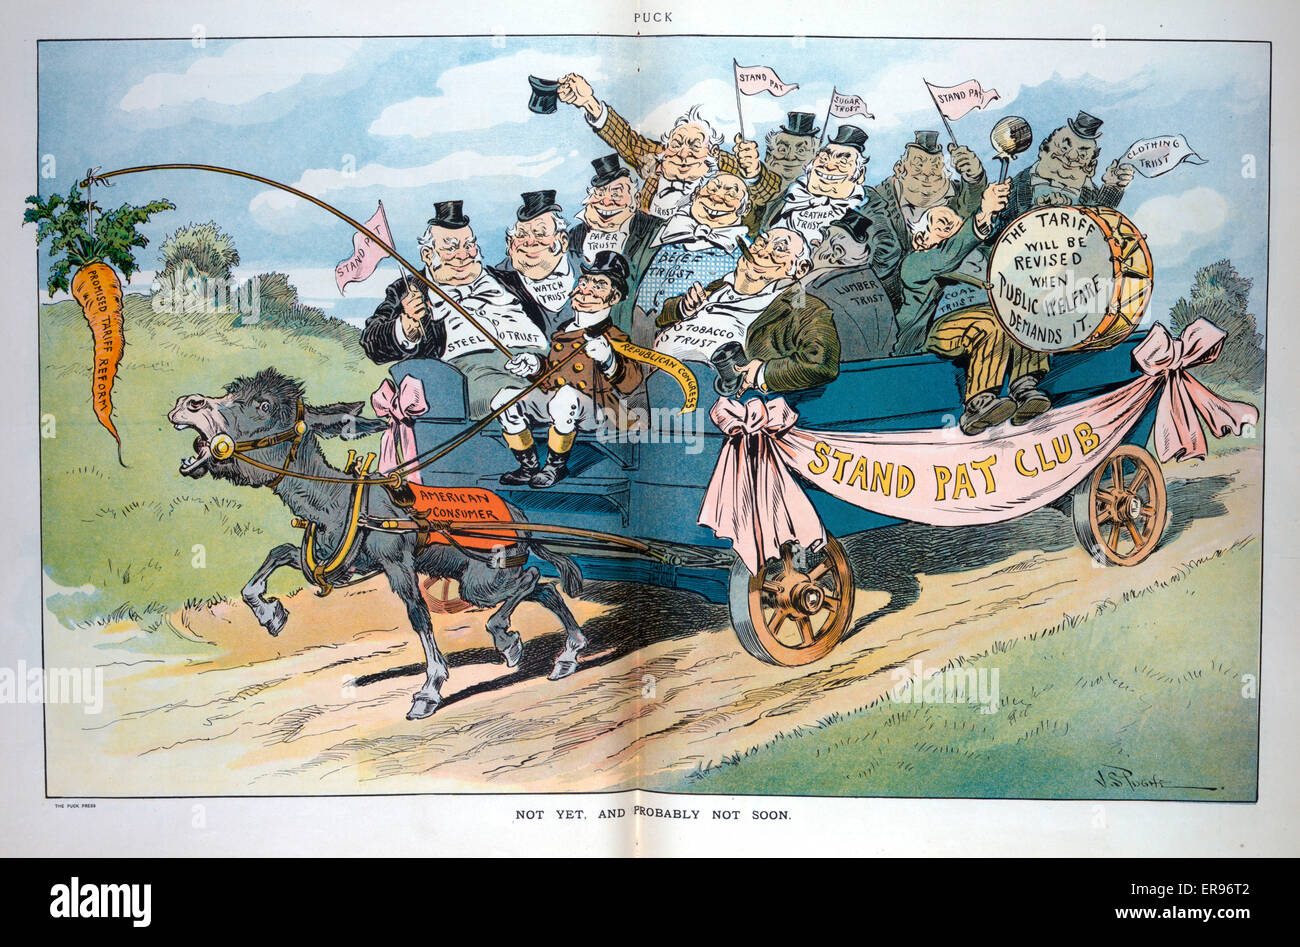 Not yet, and probably not soon. Illustration shows a wagon drawn by a single donkey labeled American Consumer chasing a carrot labeled Promised Tariff Reform dangling from a stick held by the wagon driver labeled Republican Congress. The wagon is transpor Stock Photo